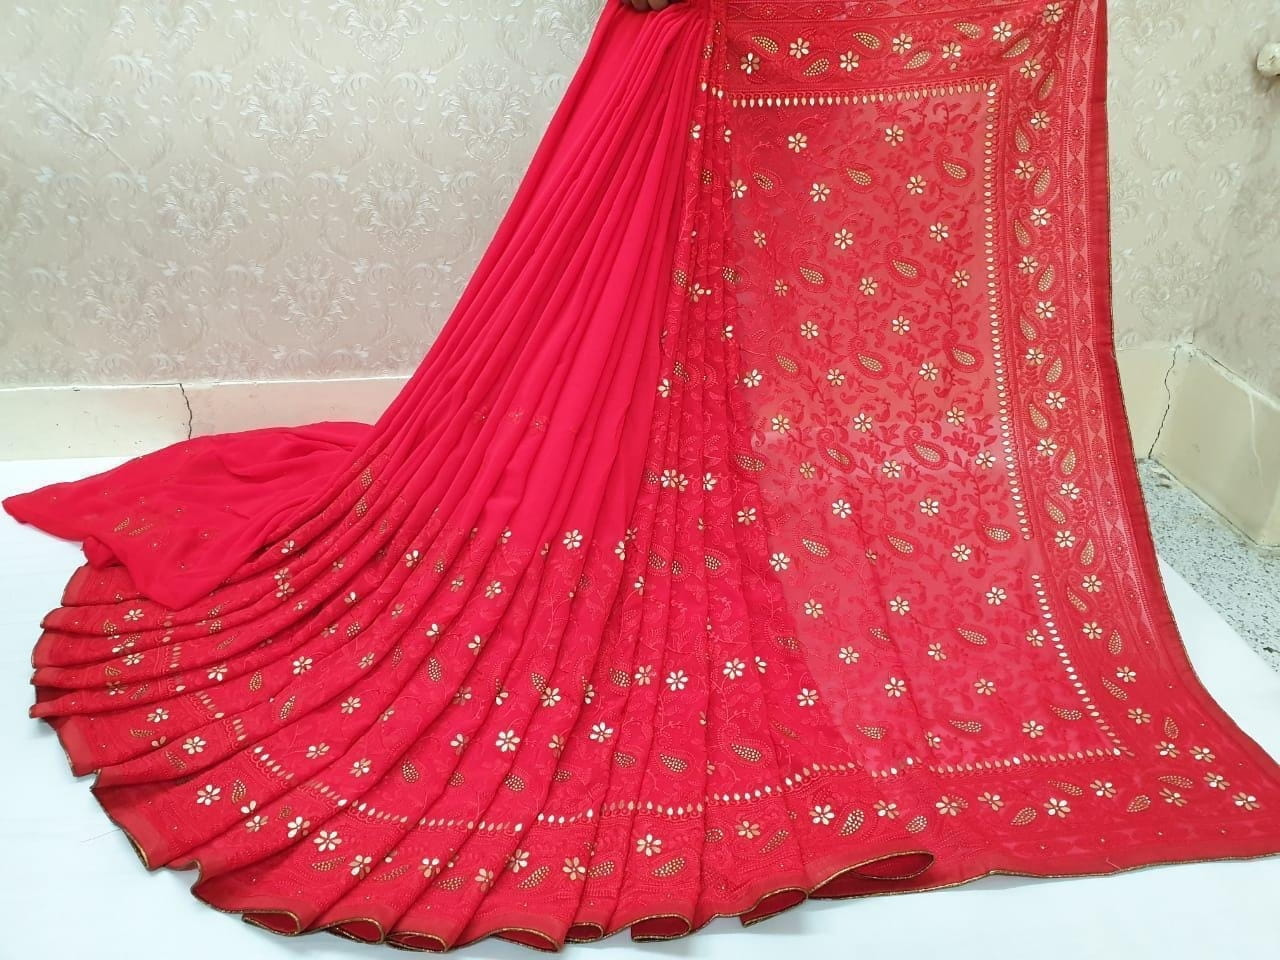 Astounding Red Color Designer Georgette Diamond Chain Embroidered Work Fancy PipingBanglori Patta Designer Saree Blouse For Party Wear